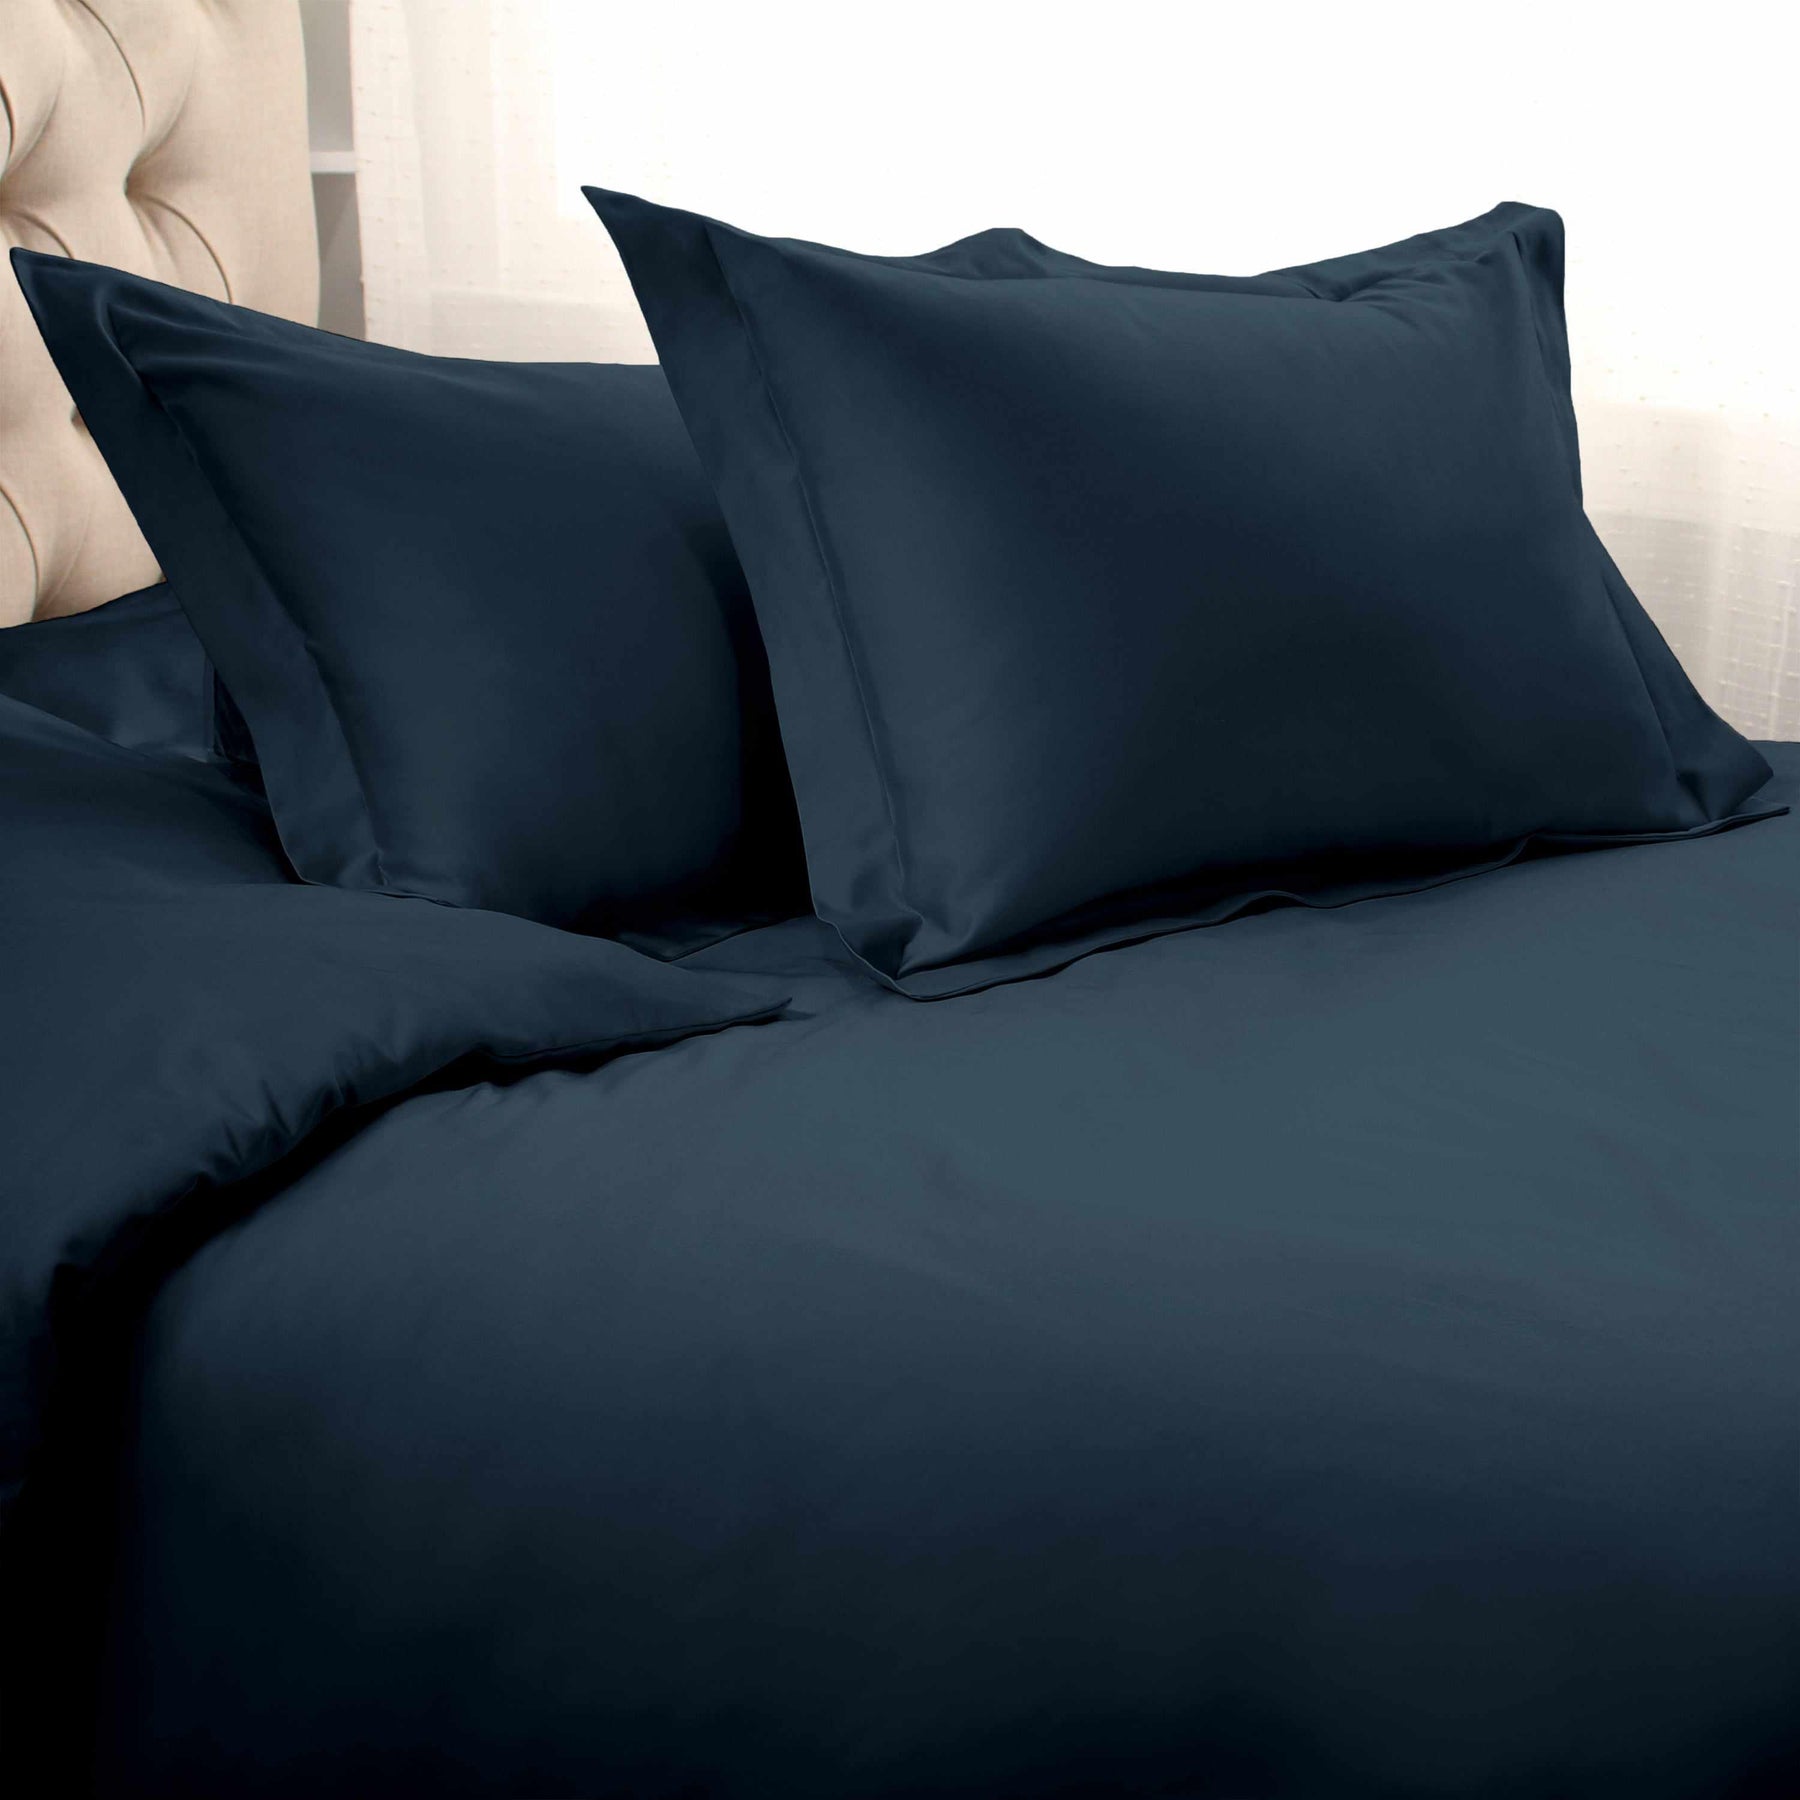  Superior Egyptian Cotton Solid All-Season Duvet Cover Set with Button Closure -  Navy Blue